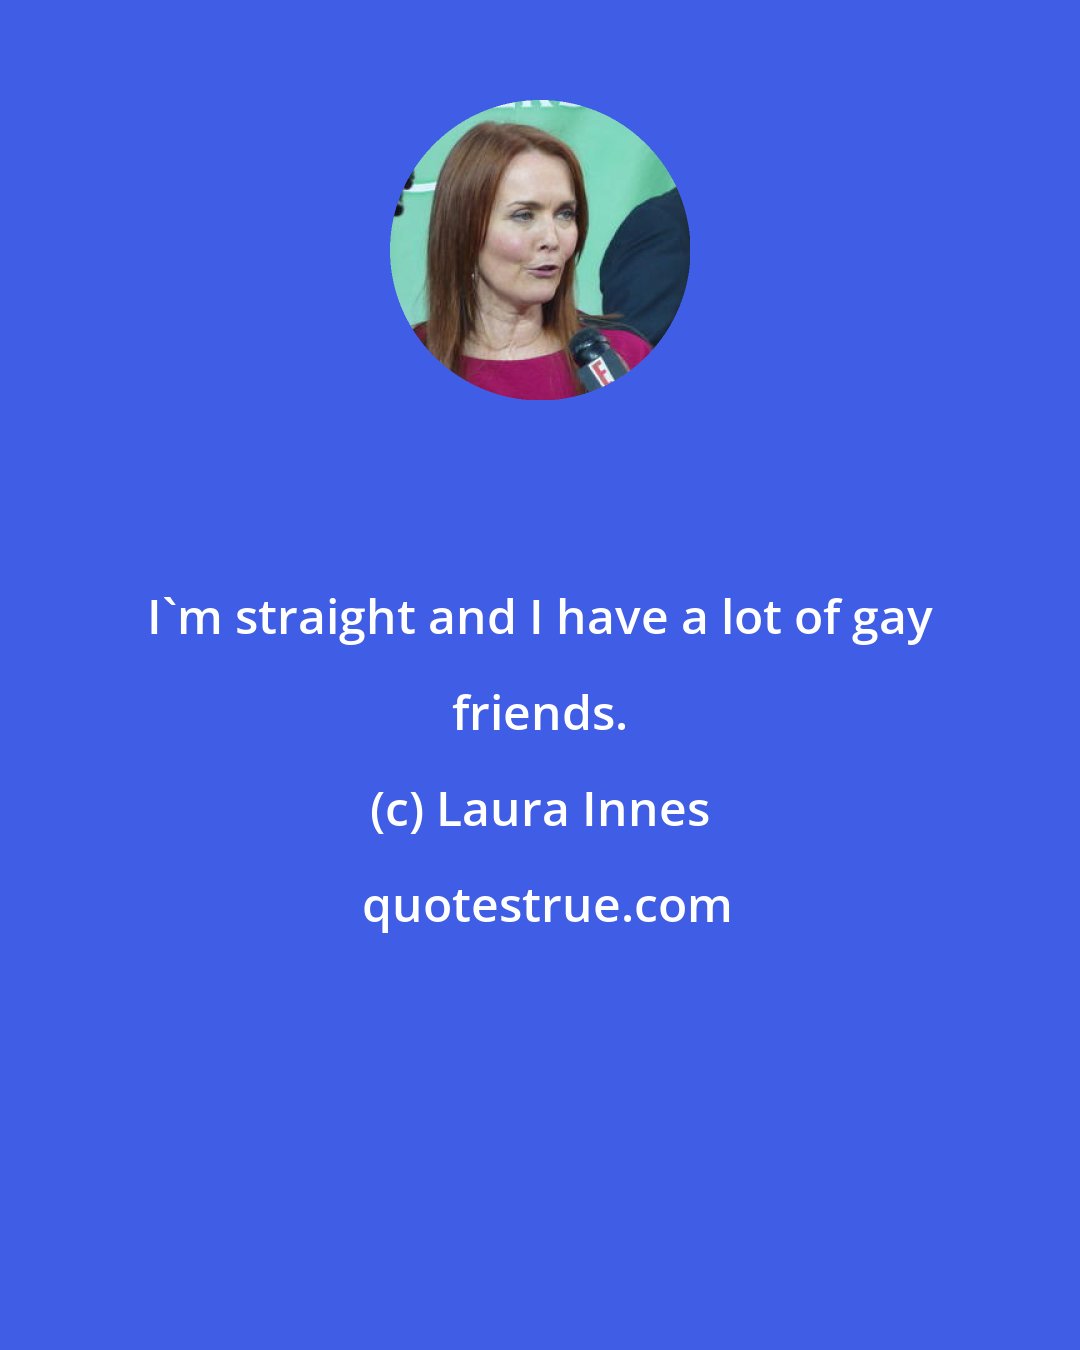 Laura Innes: I'm straight and I have a lot of gay friends.